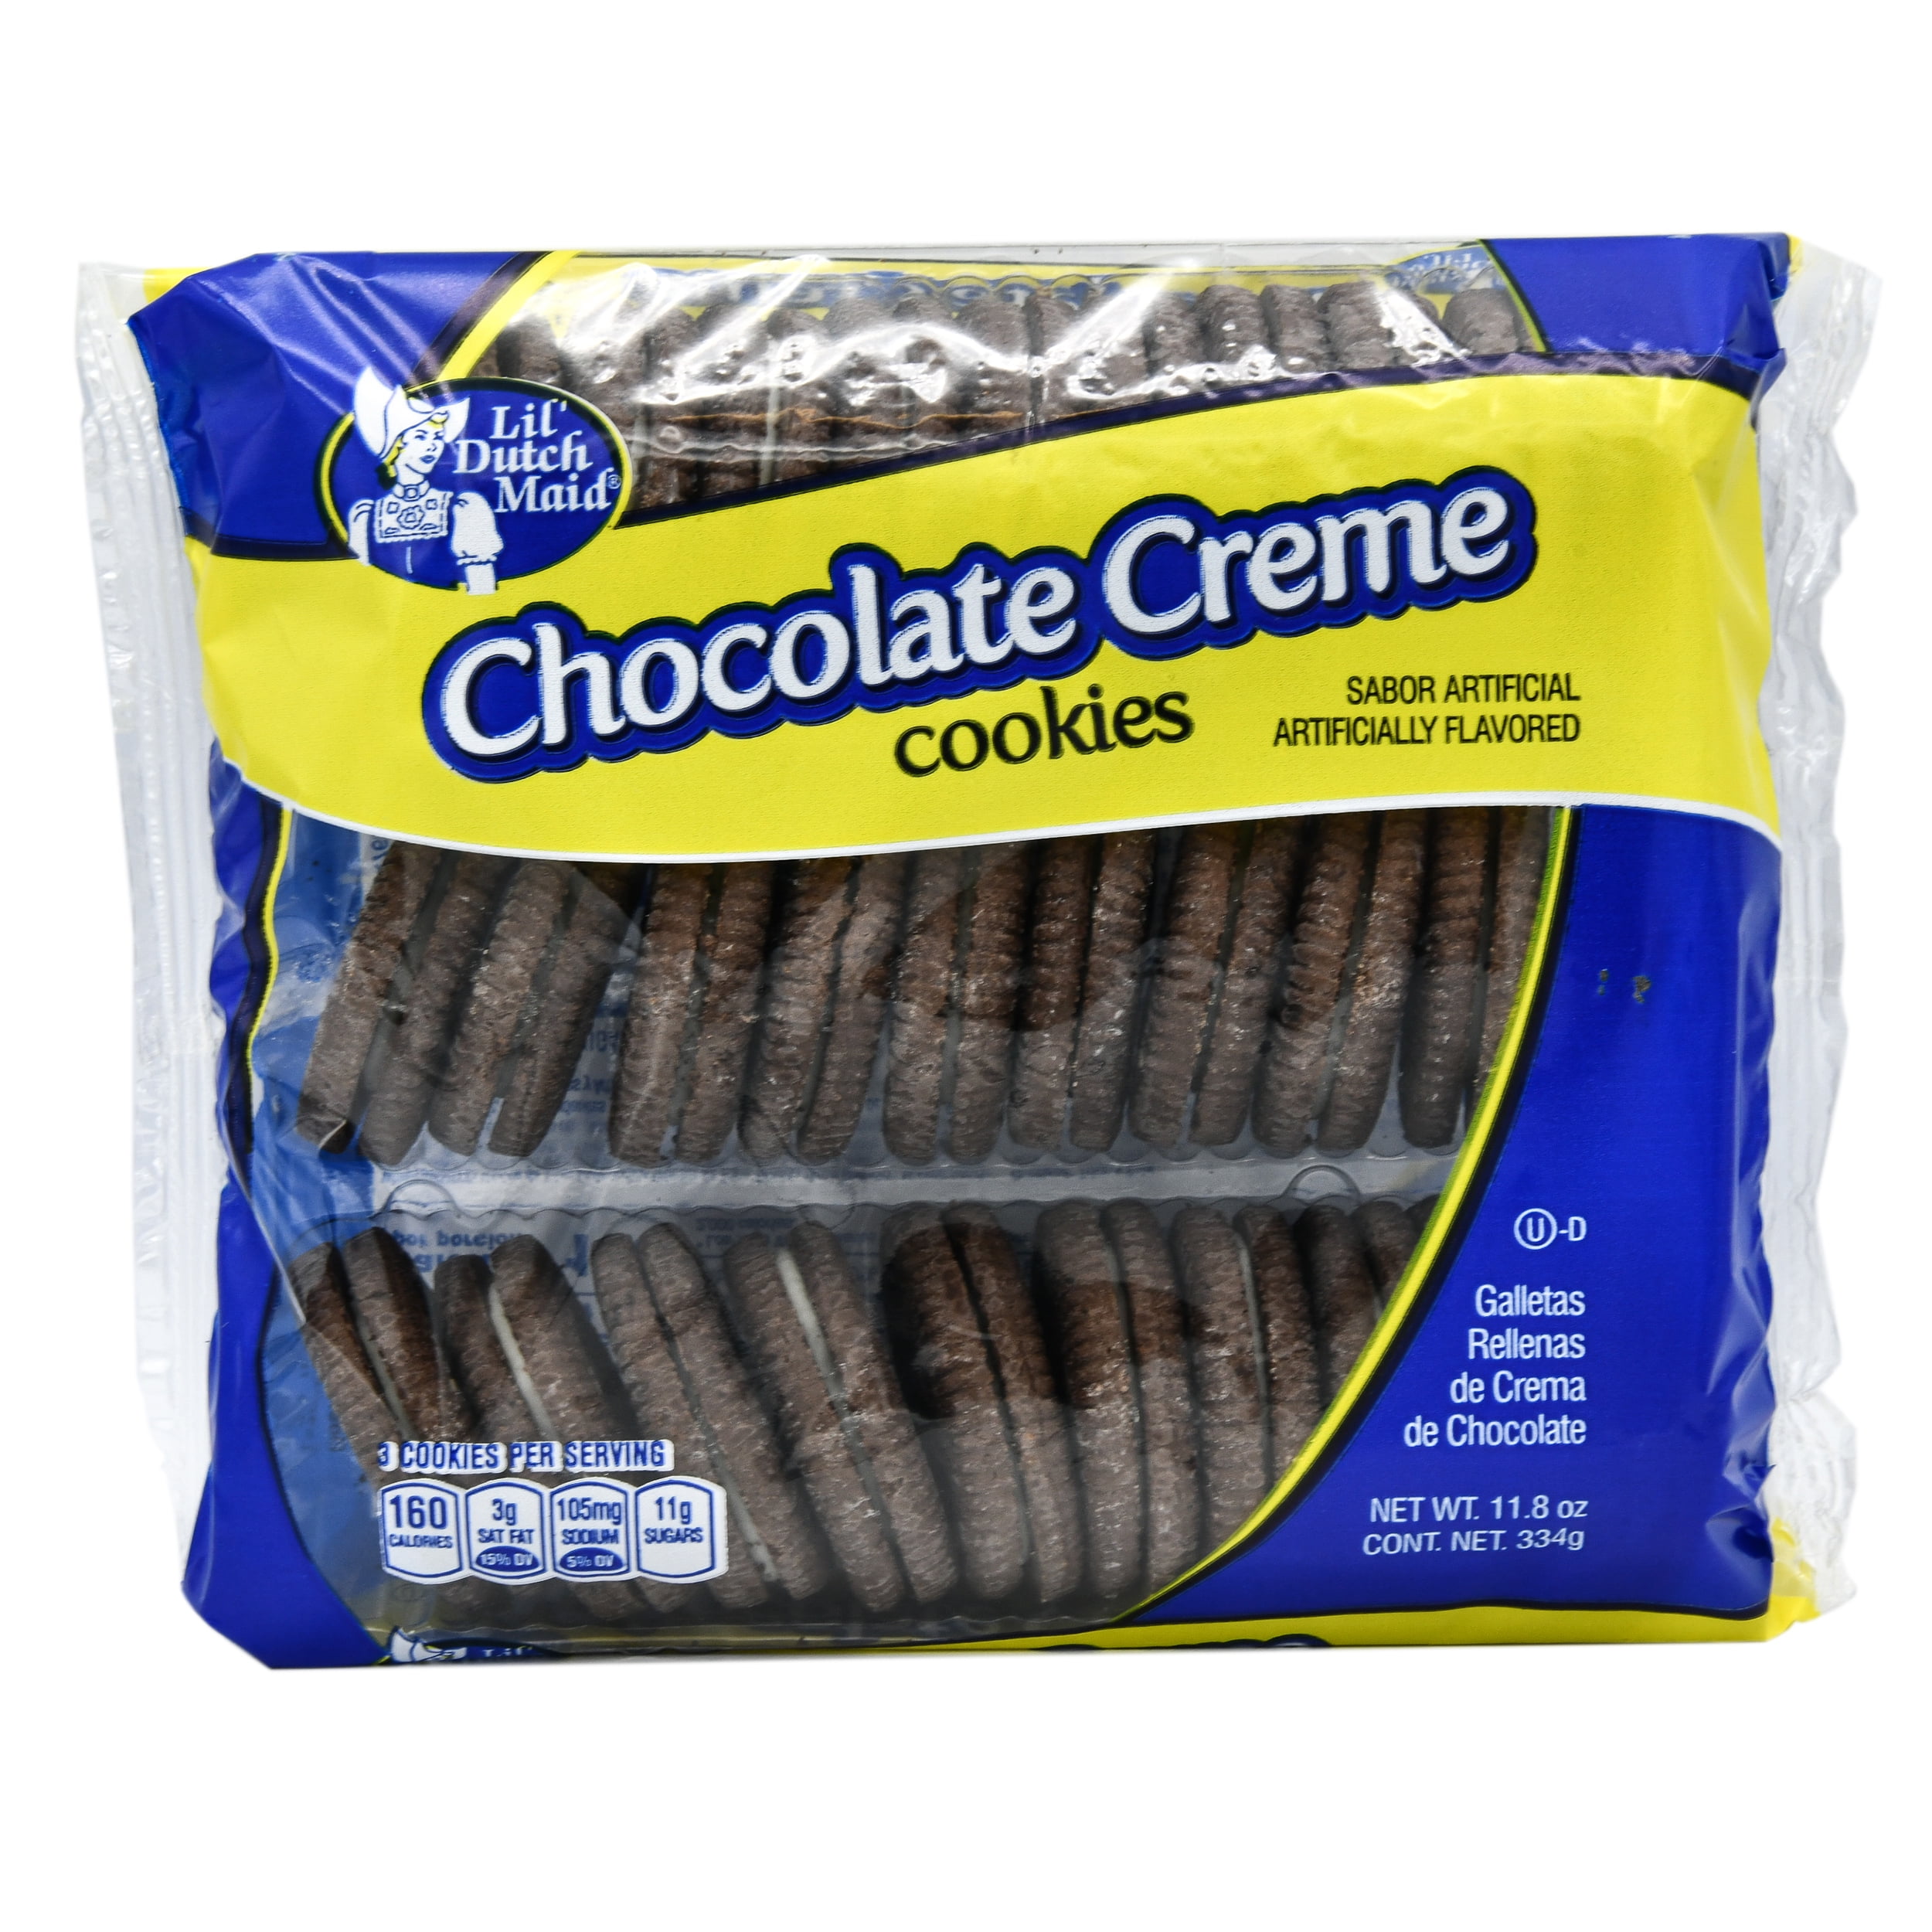 Little Dutch Maid Chocolate Creme Filled Cookies 11.8 oz